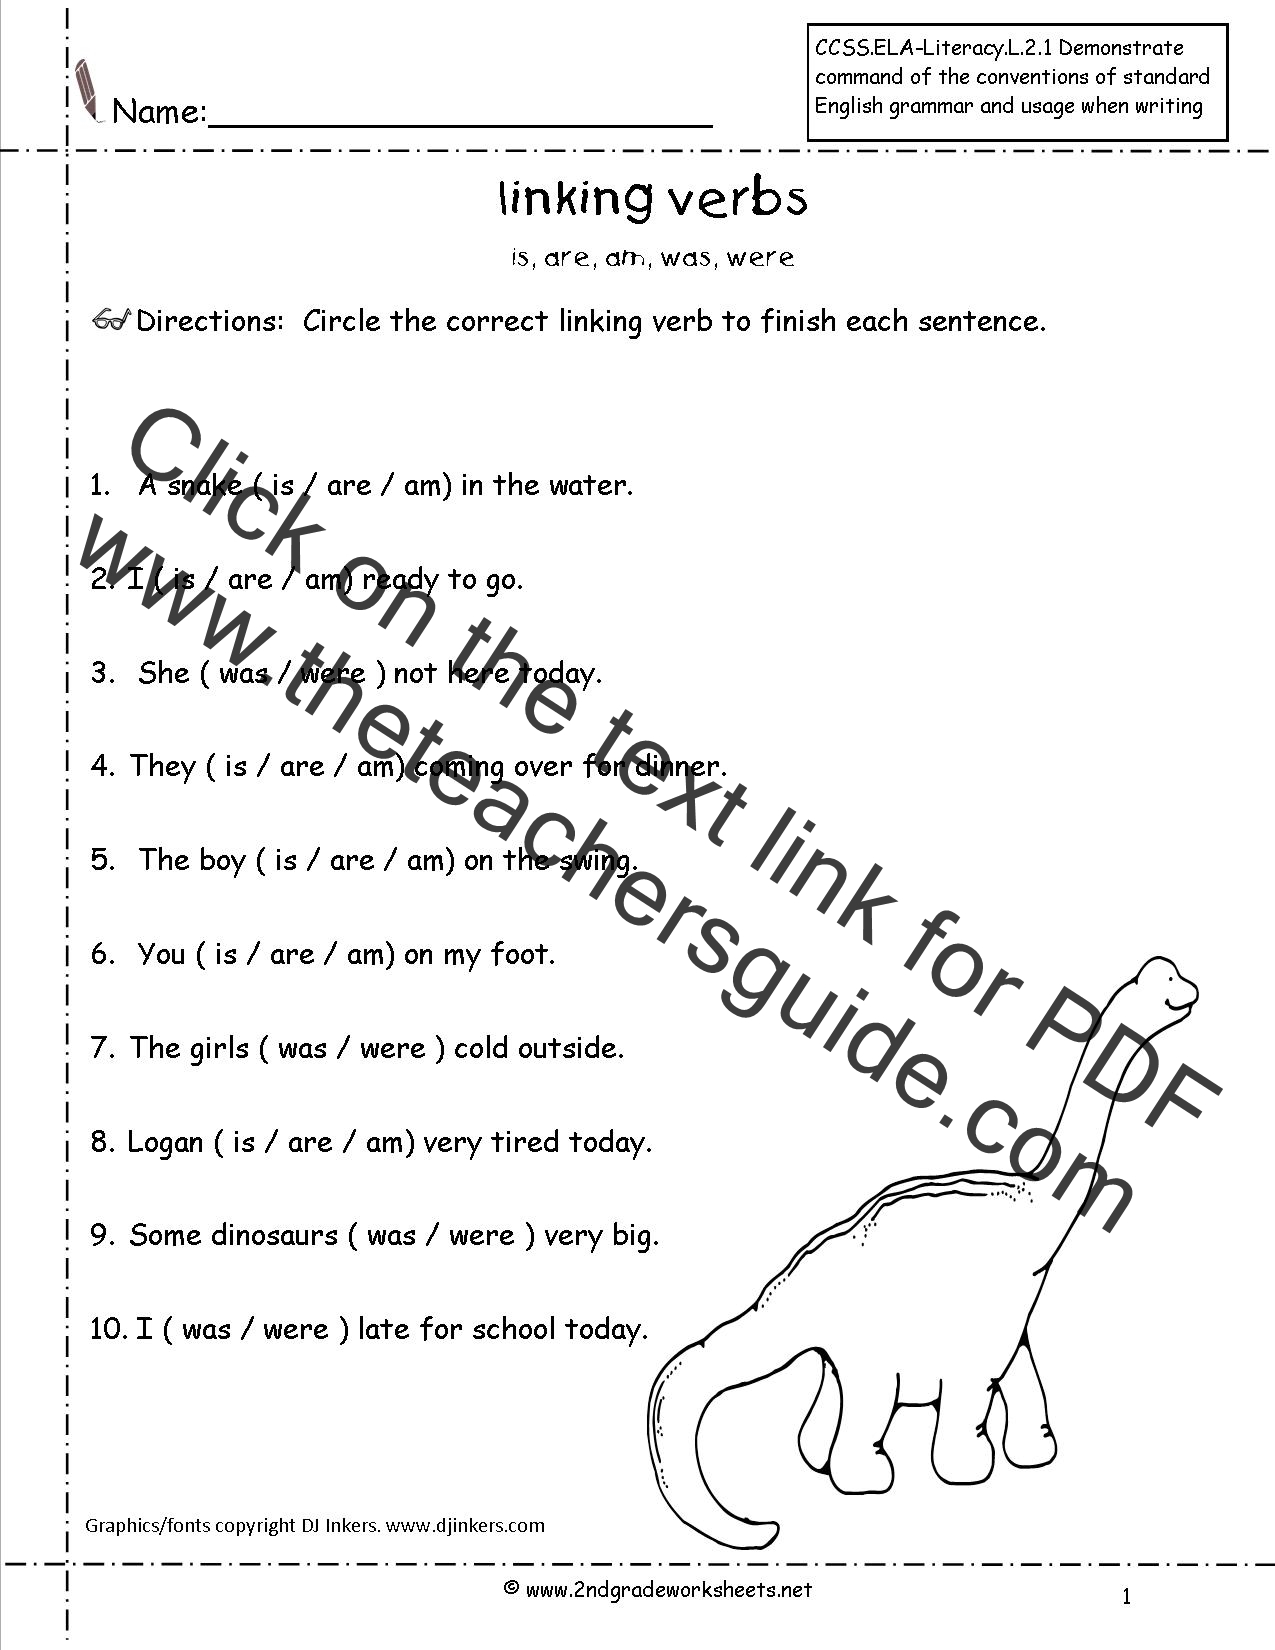 action-linking-verbs-worksheets-k5-learning-action-verbs-and-linking-verbs-worksheet-k5